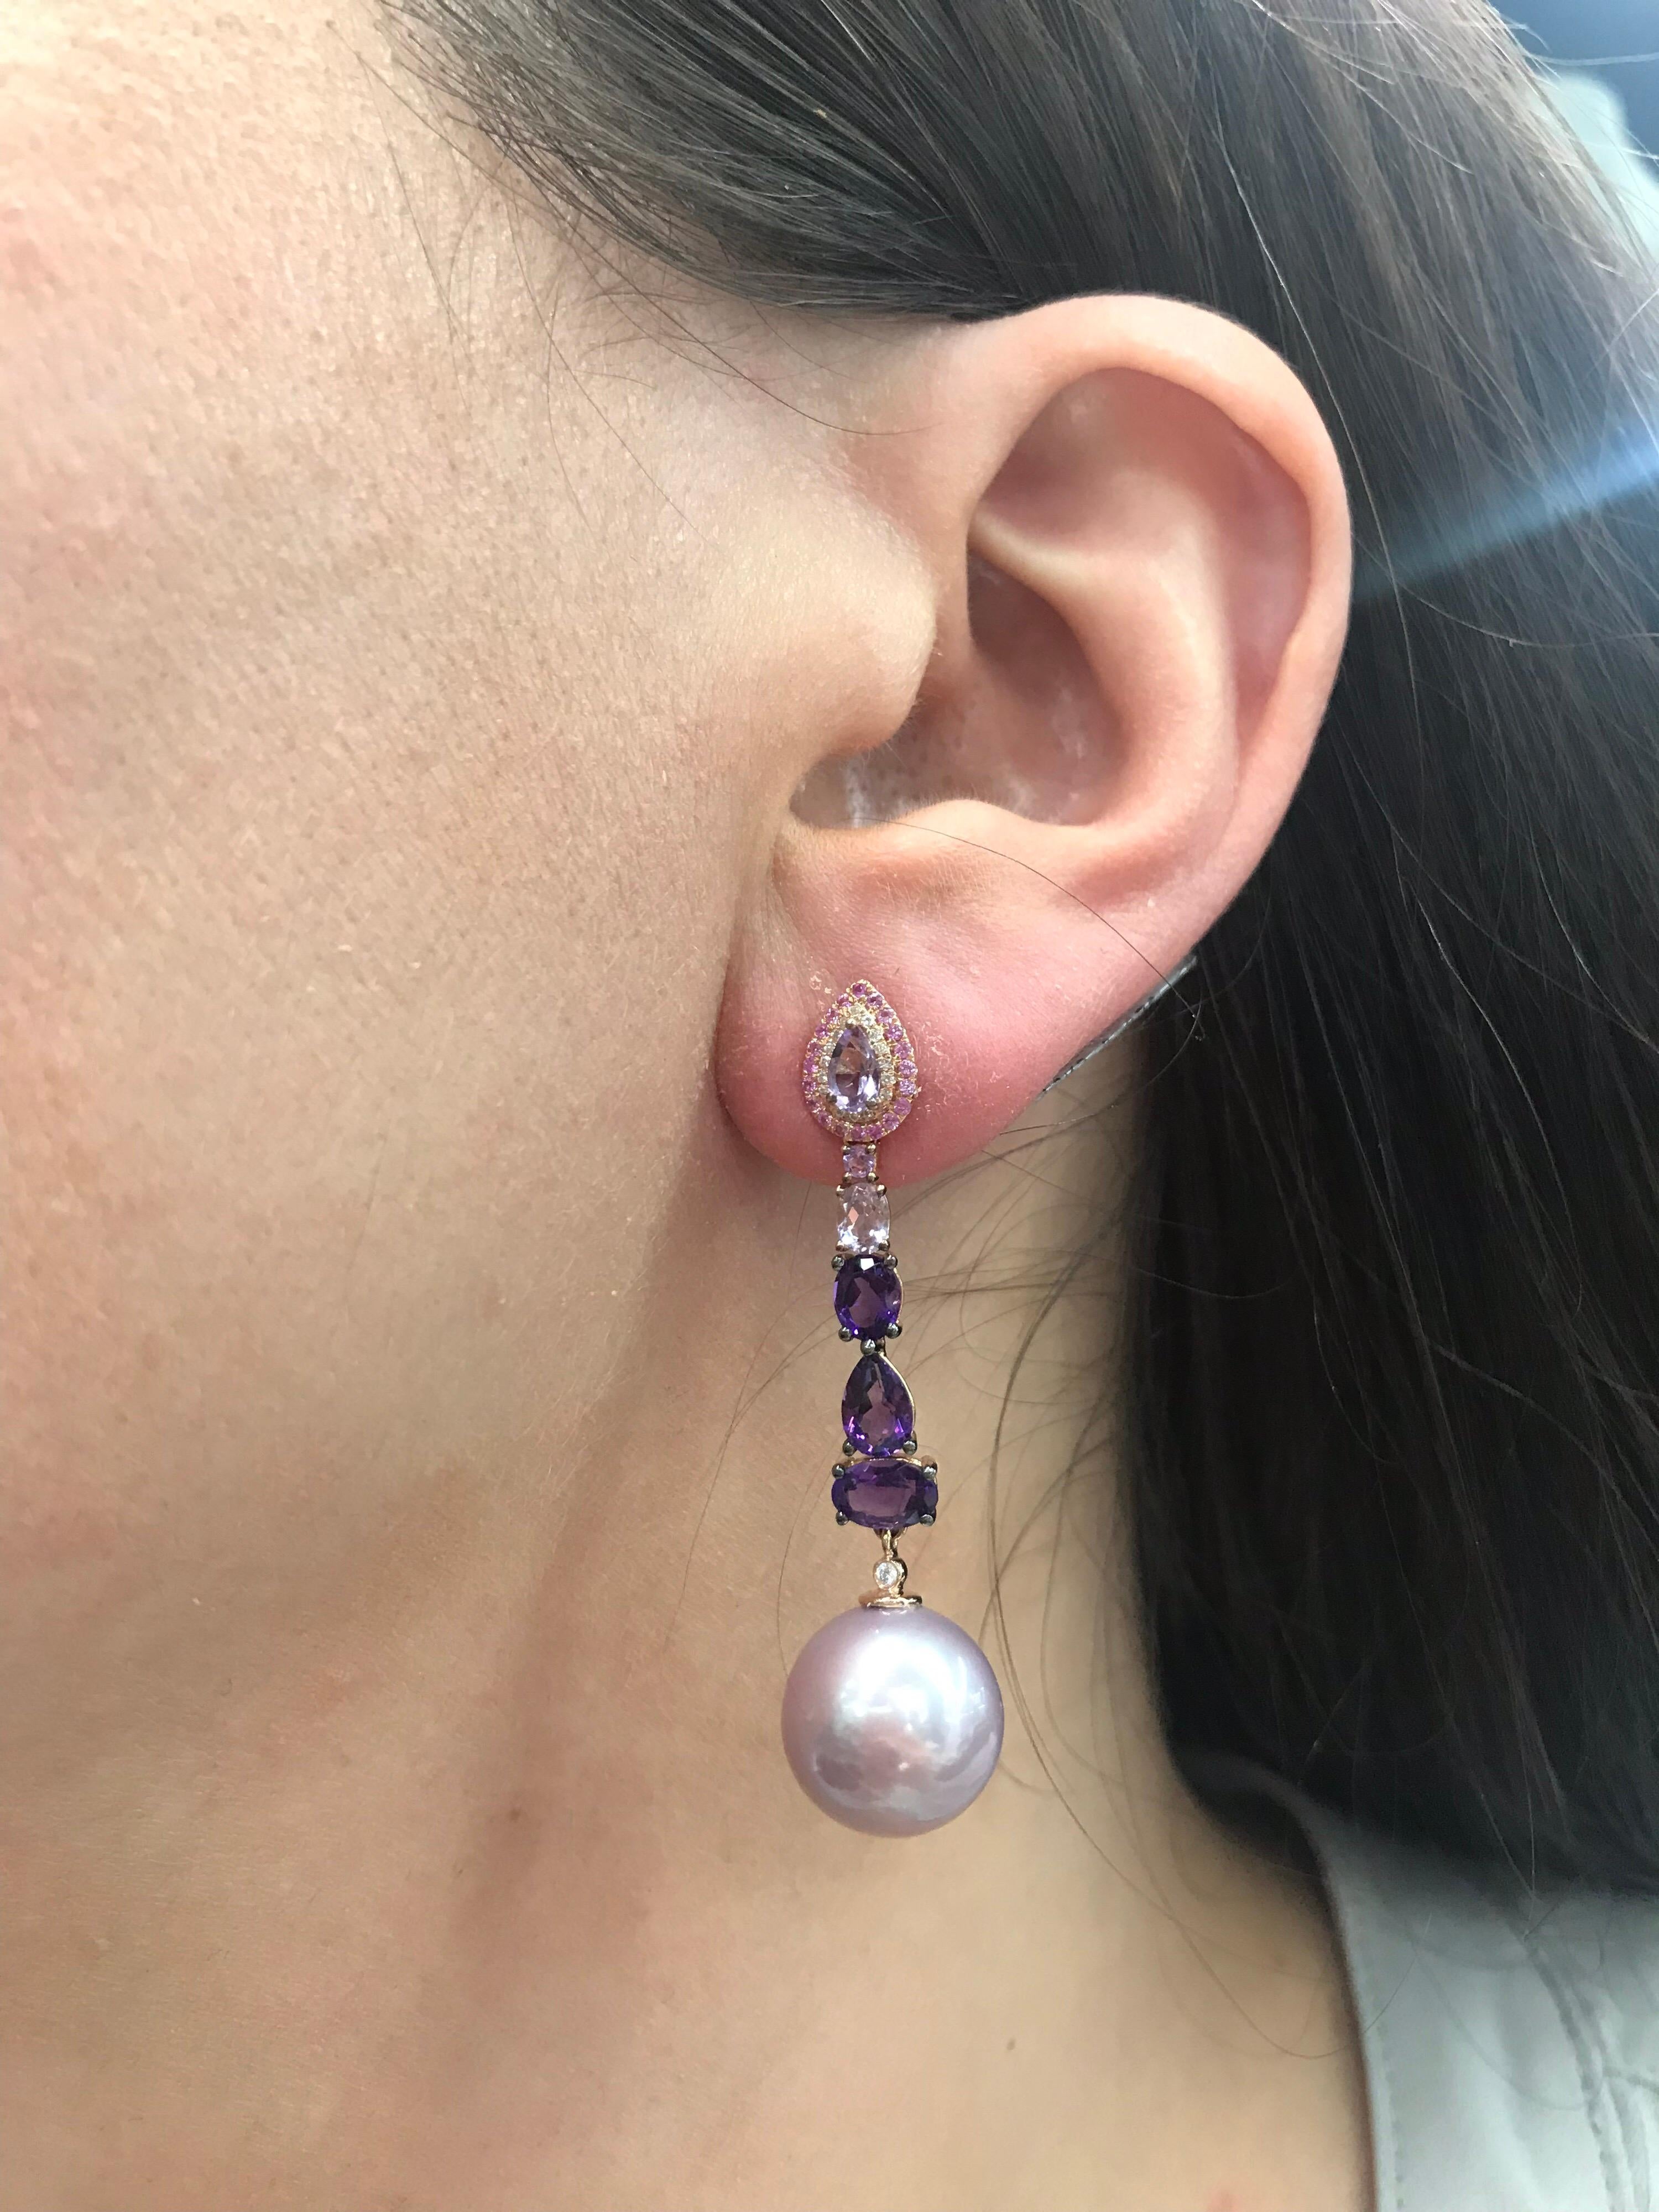 18K Rose gold drop earrings featuring 10 Amethysts, 2.84 carats, Pink Sapphires, 0.08 carats and two Pink Freshwater Pearls measuring 13-14 mm.